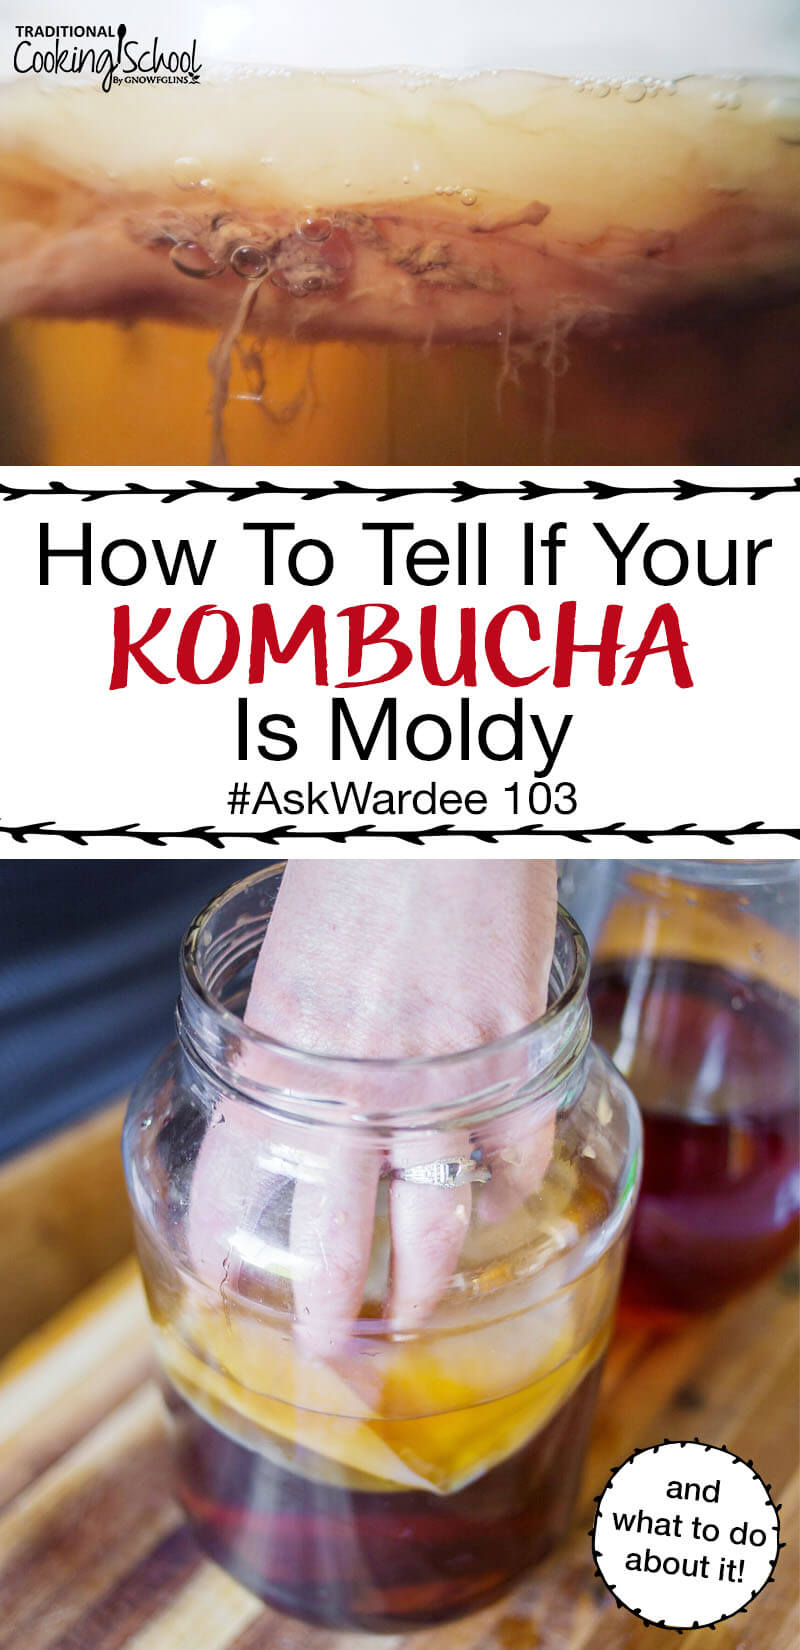 Did you know... Kombucha rarely grows mold? The SCOBY (mother culture) is quite hardy and balanced. Yet, mold does happen sometimes. Watch, listen, or read to learn how to tell if your Kombucha is moldy, plus what to do about it and how to prevent mold in future batches!